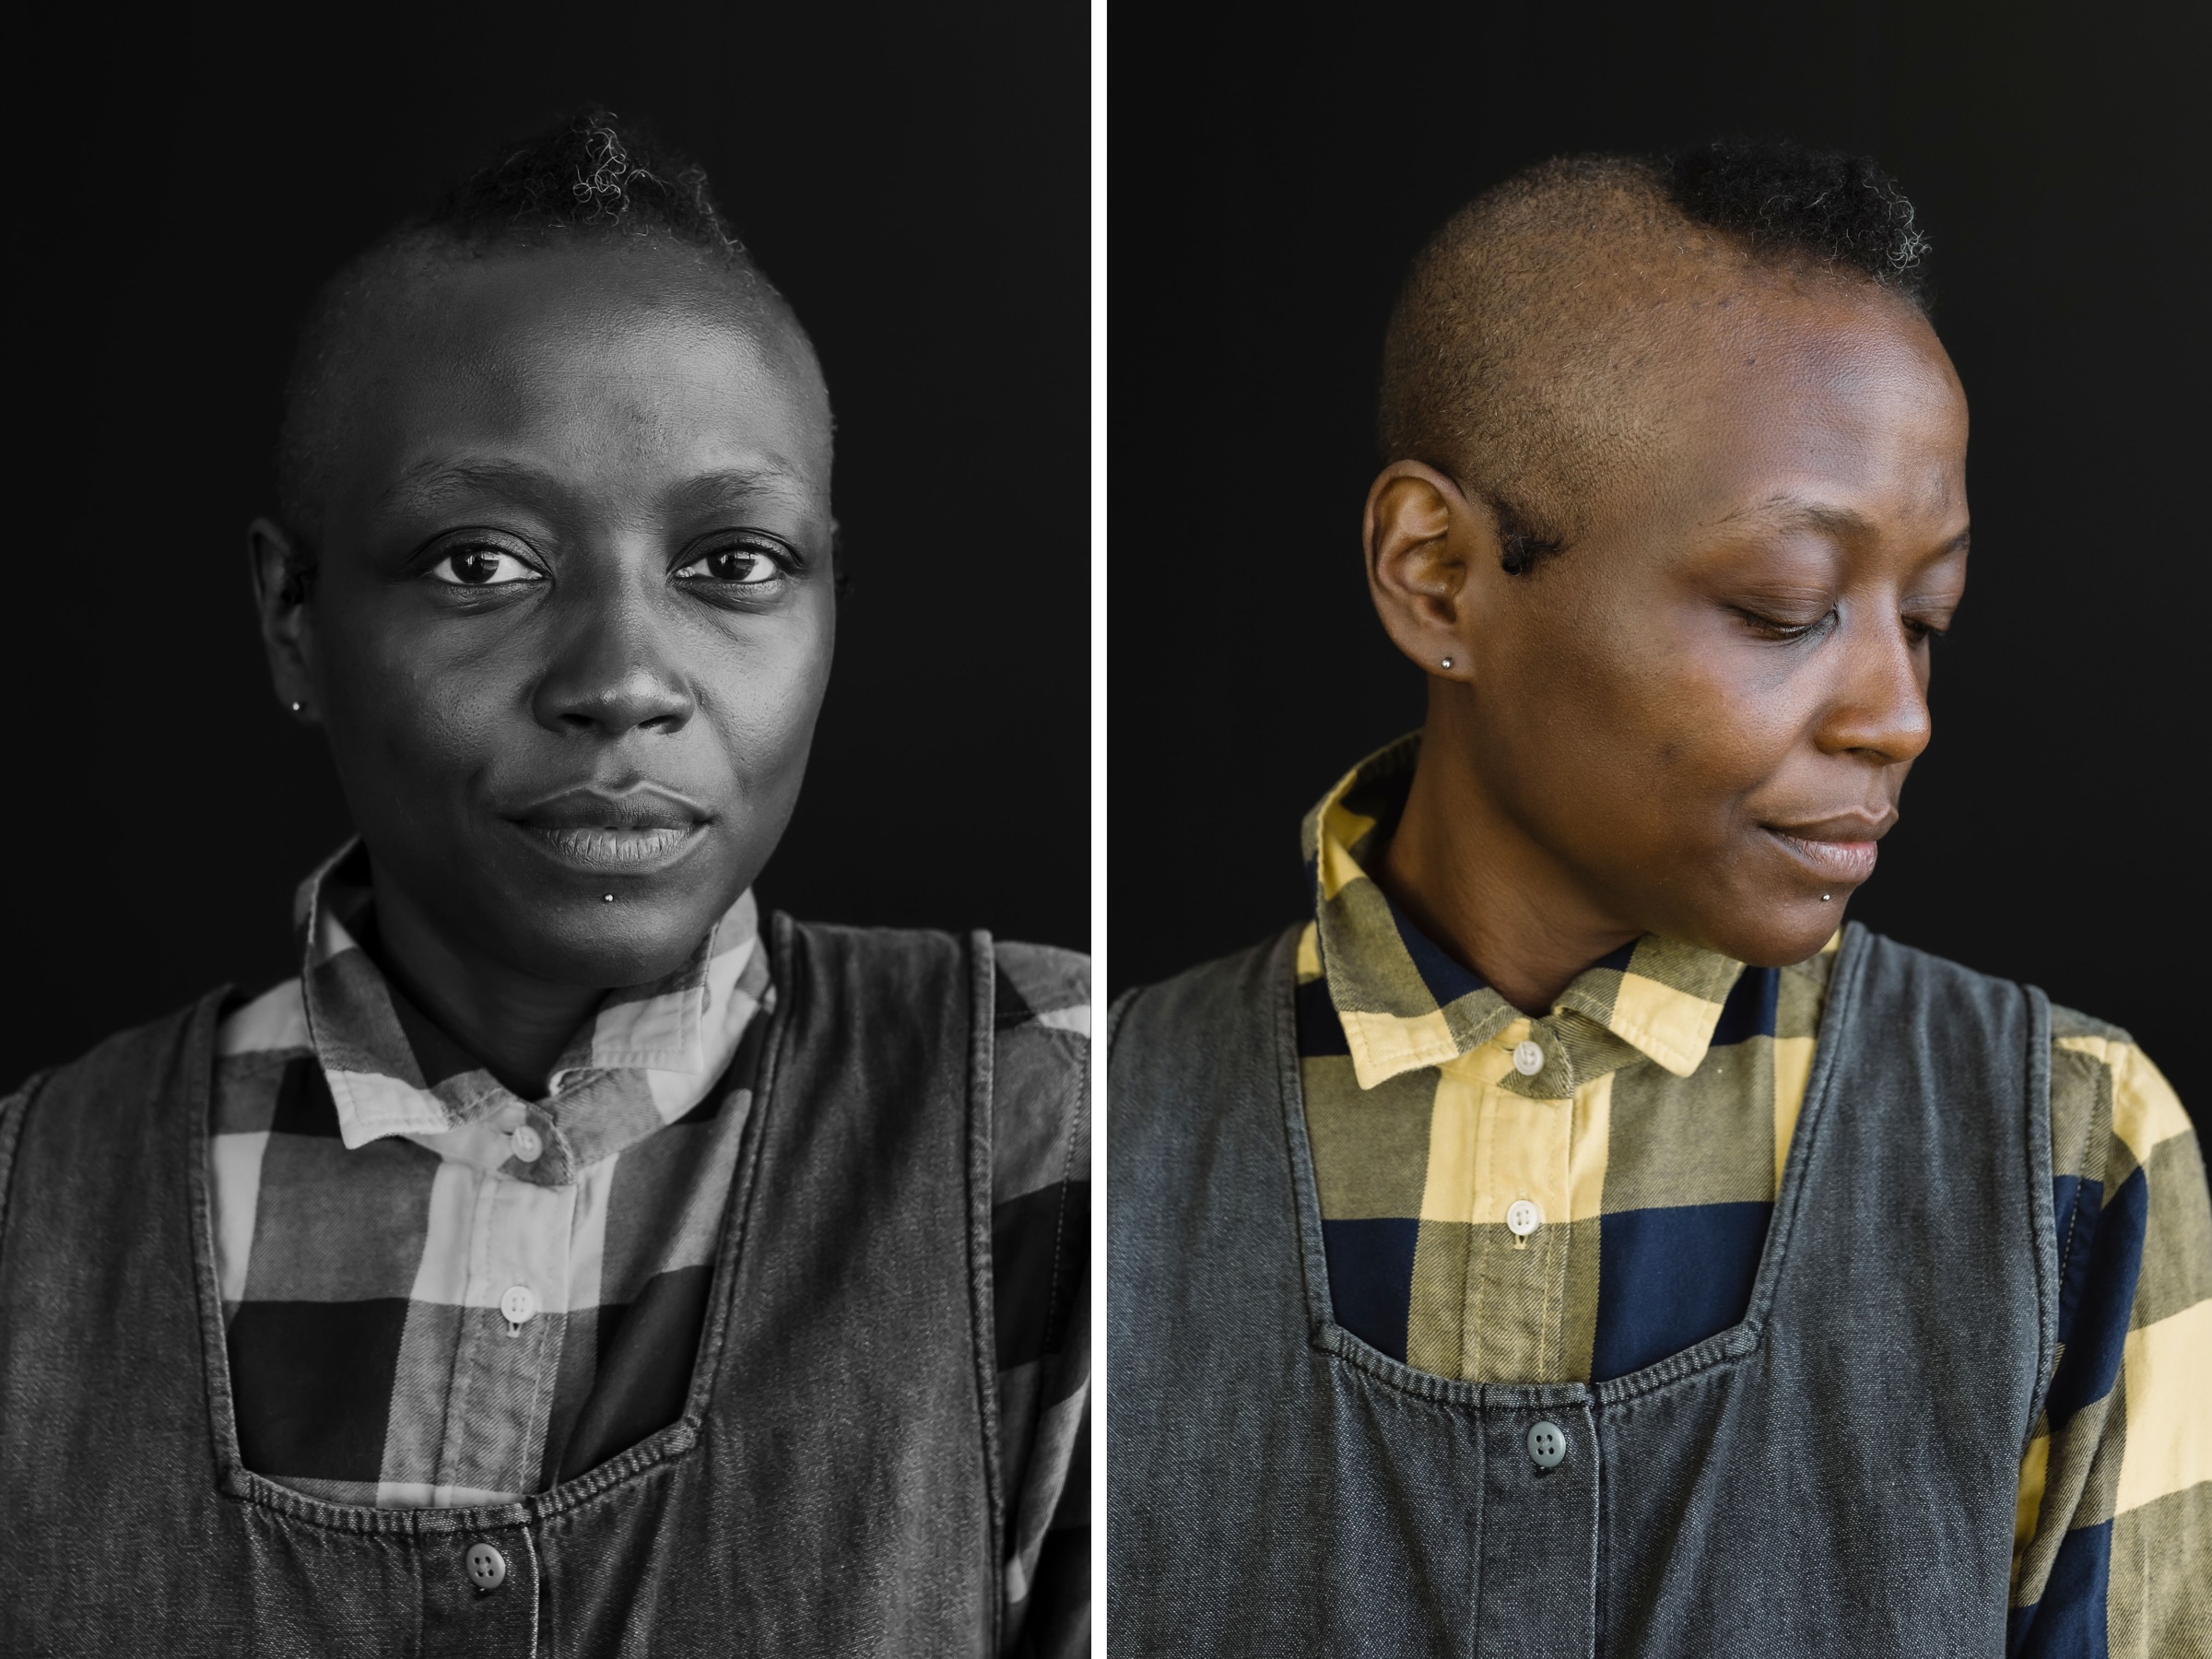 Two side-by-side portraits of artist taisha paggett. On the left, a black and white image shows the artist looking directly at the camera. On the right, the image has her looking down and to the right. She is wearing a black and yellow-check shirt and black, wide-strapped overalls.